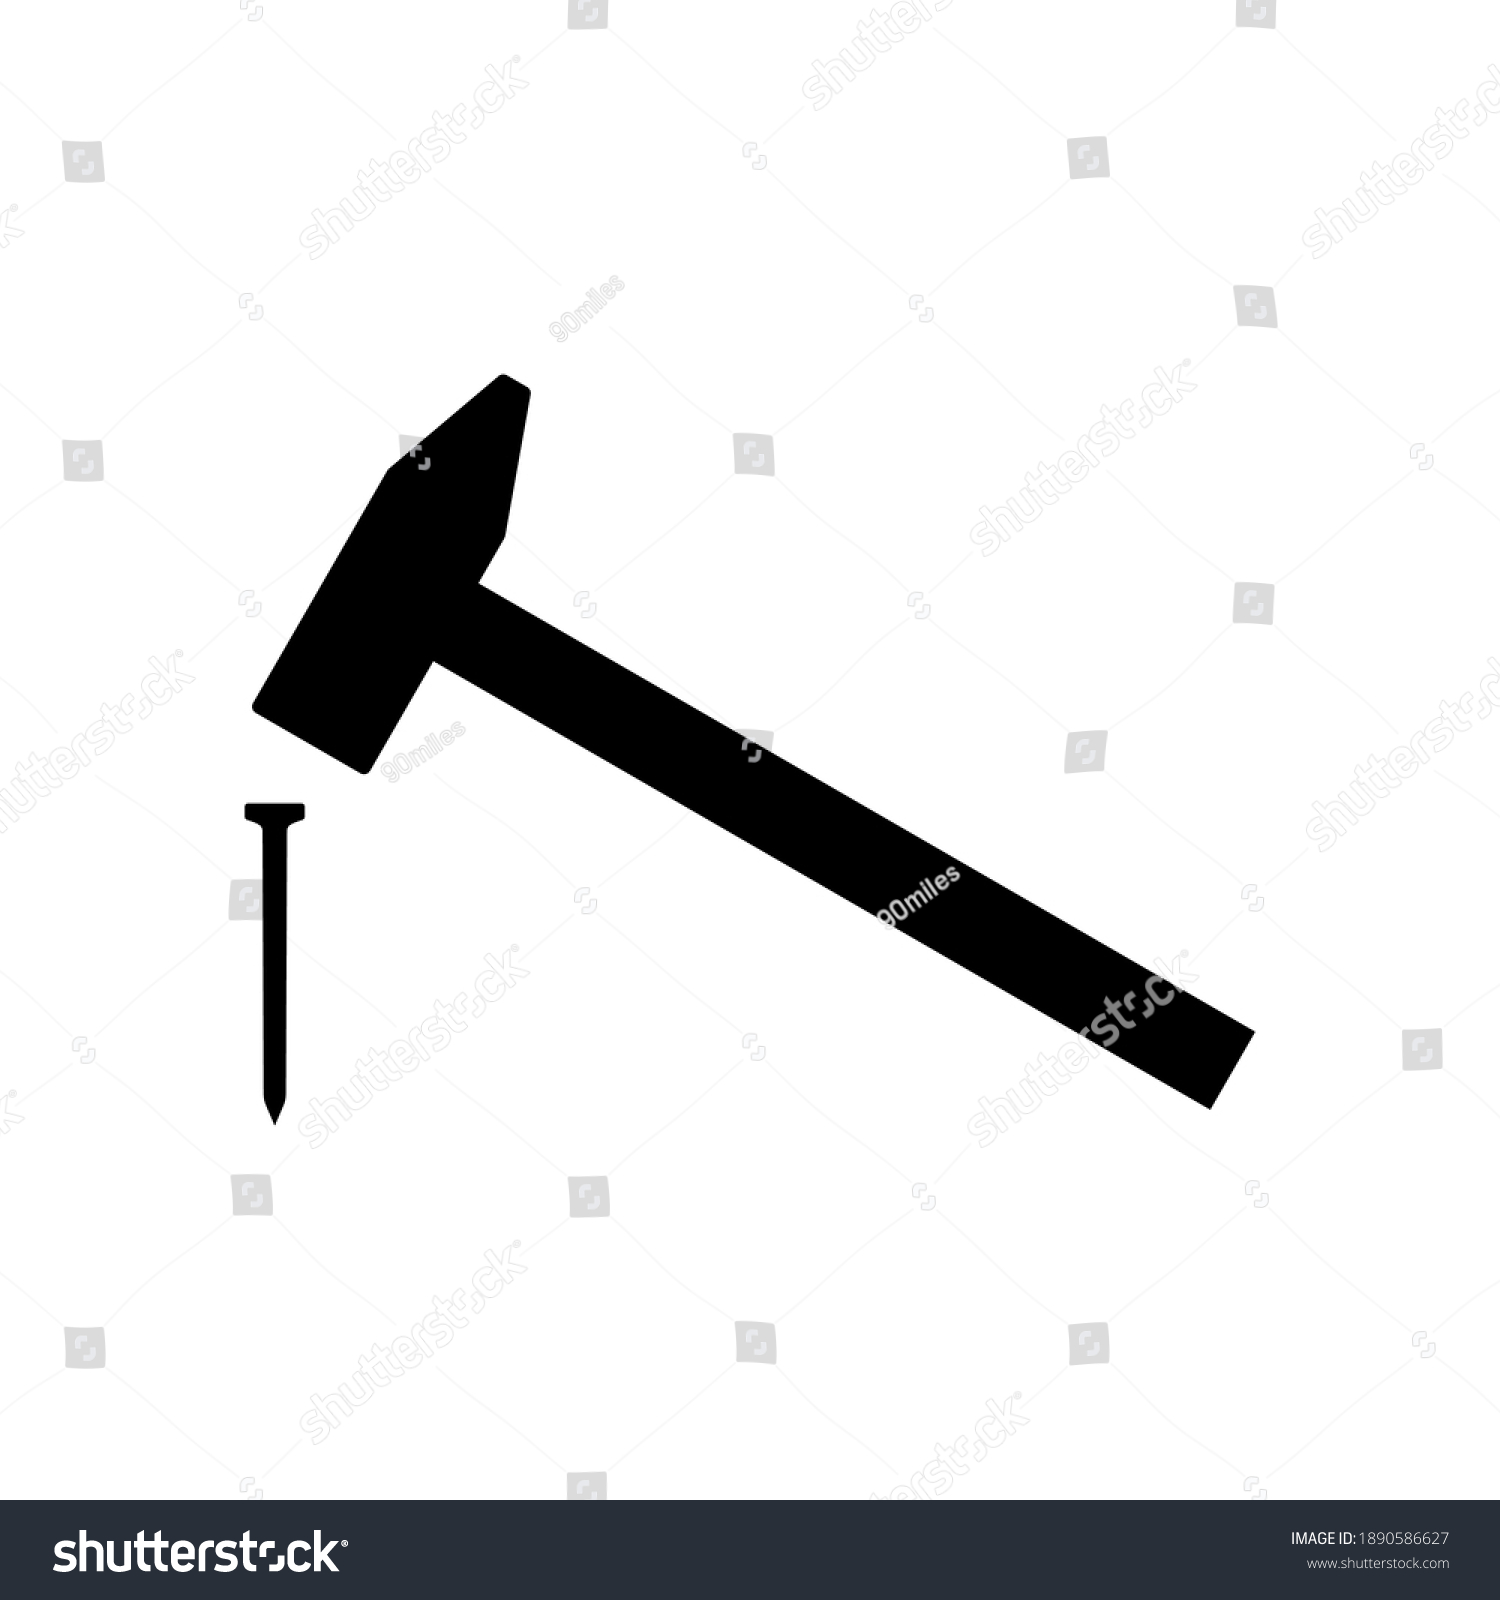 SVG of Hammer hitting nail icon. Simple hammer with weighted metal head. Vector Illustration svg